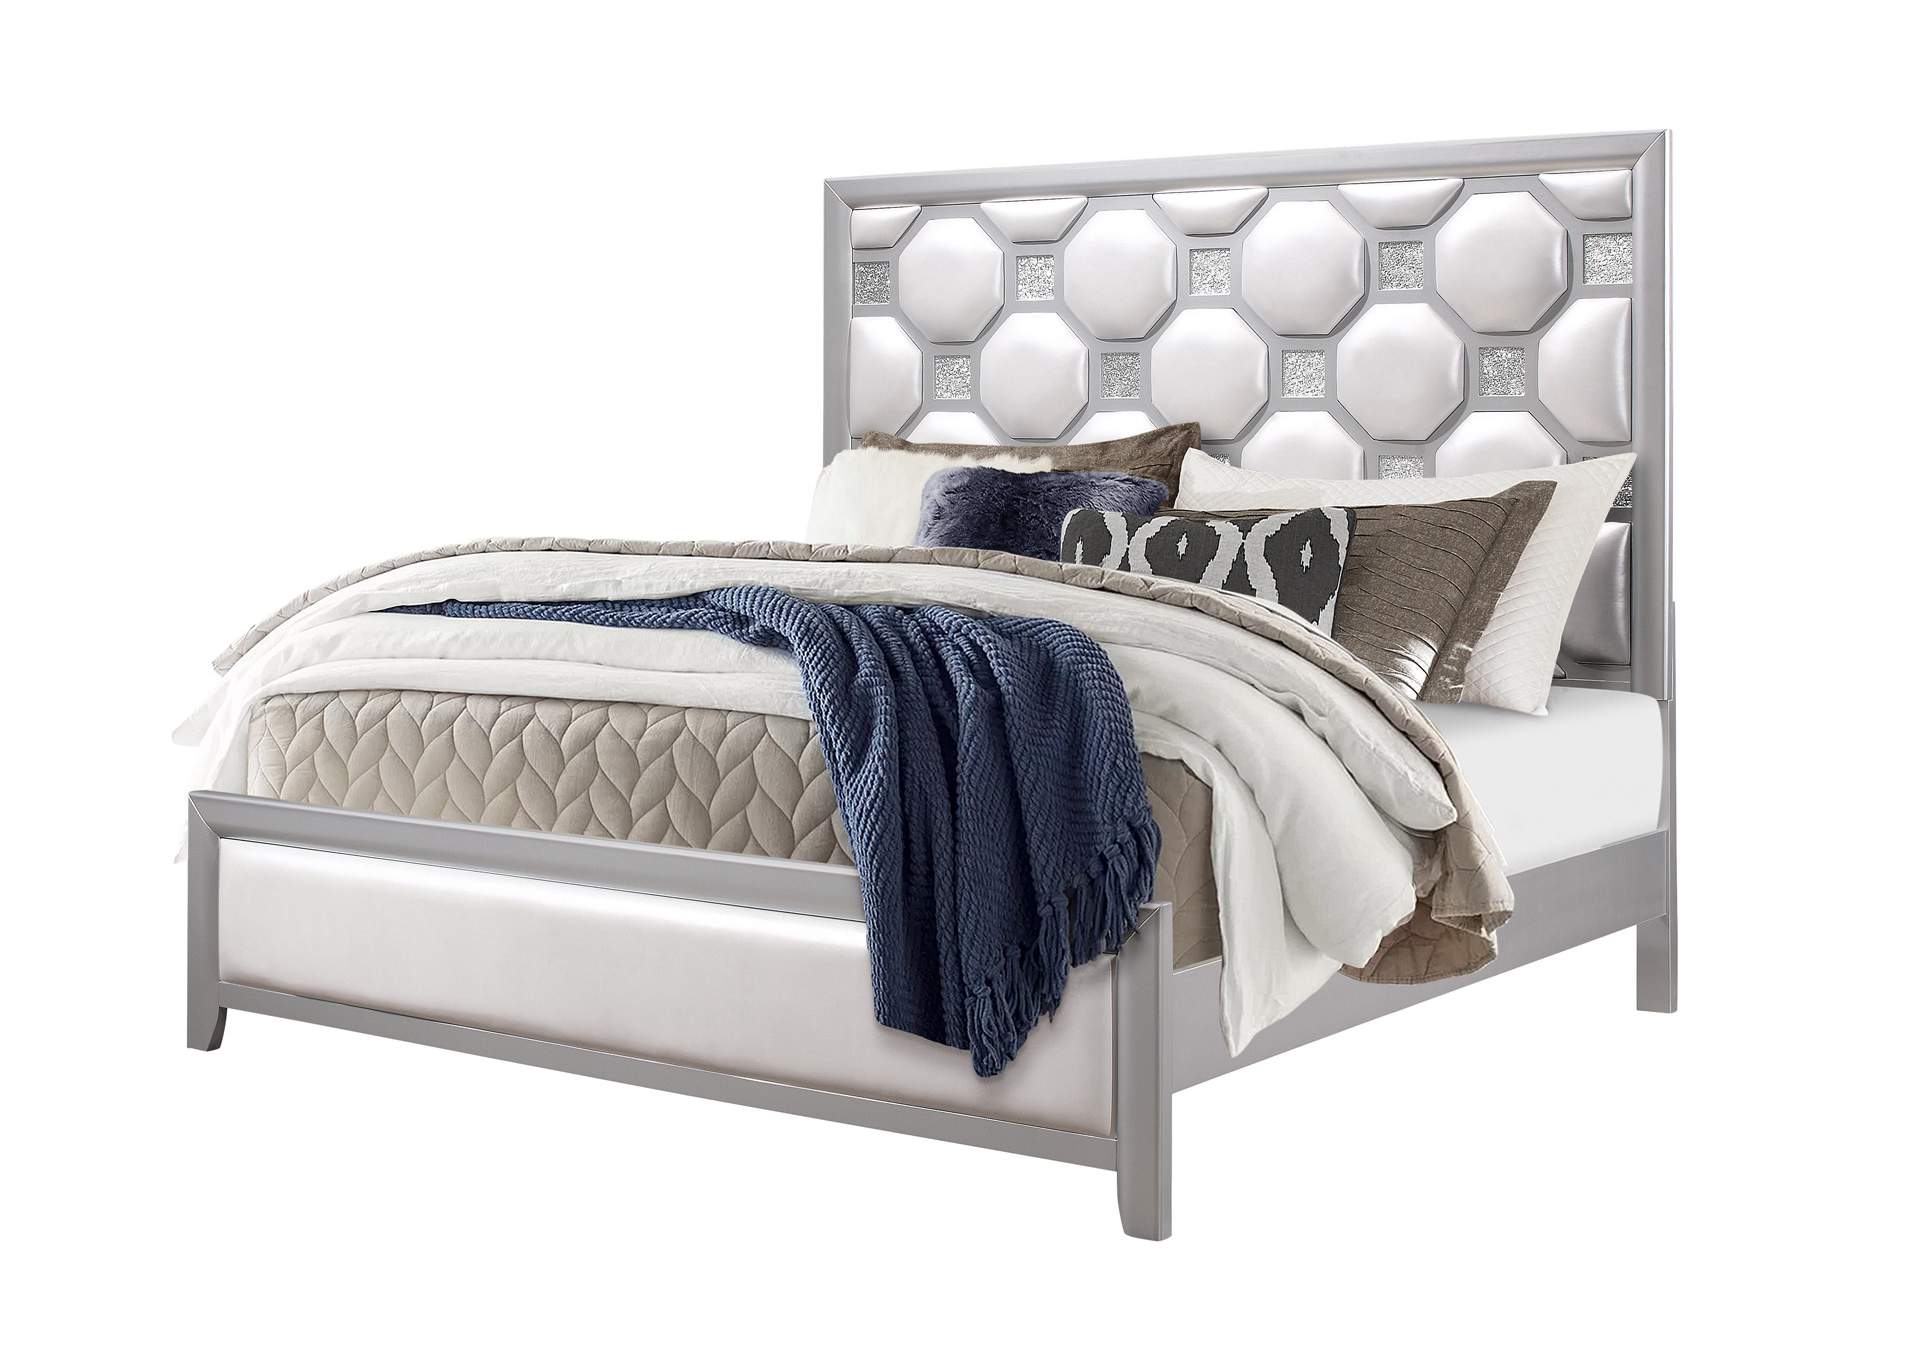 White/Silver Kylie King Bed,Global Furniture USA